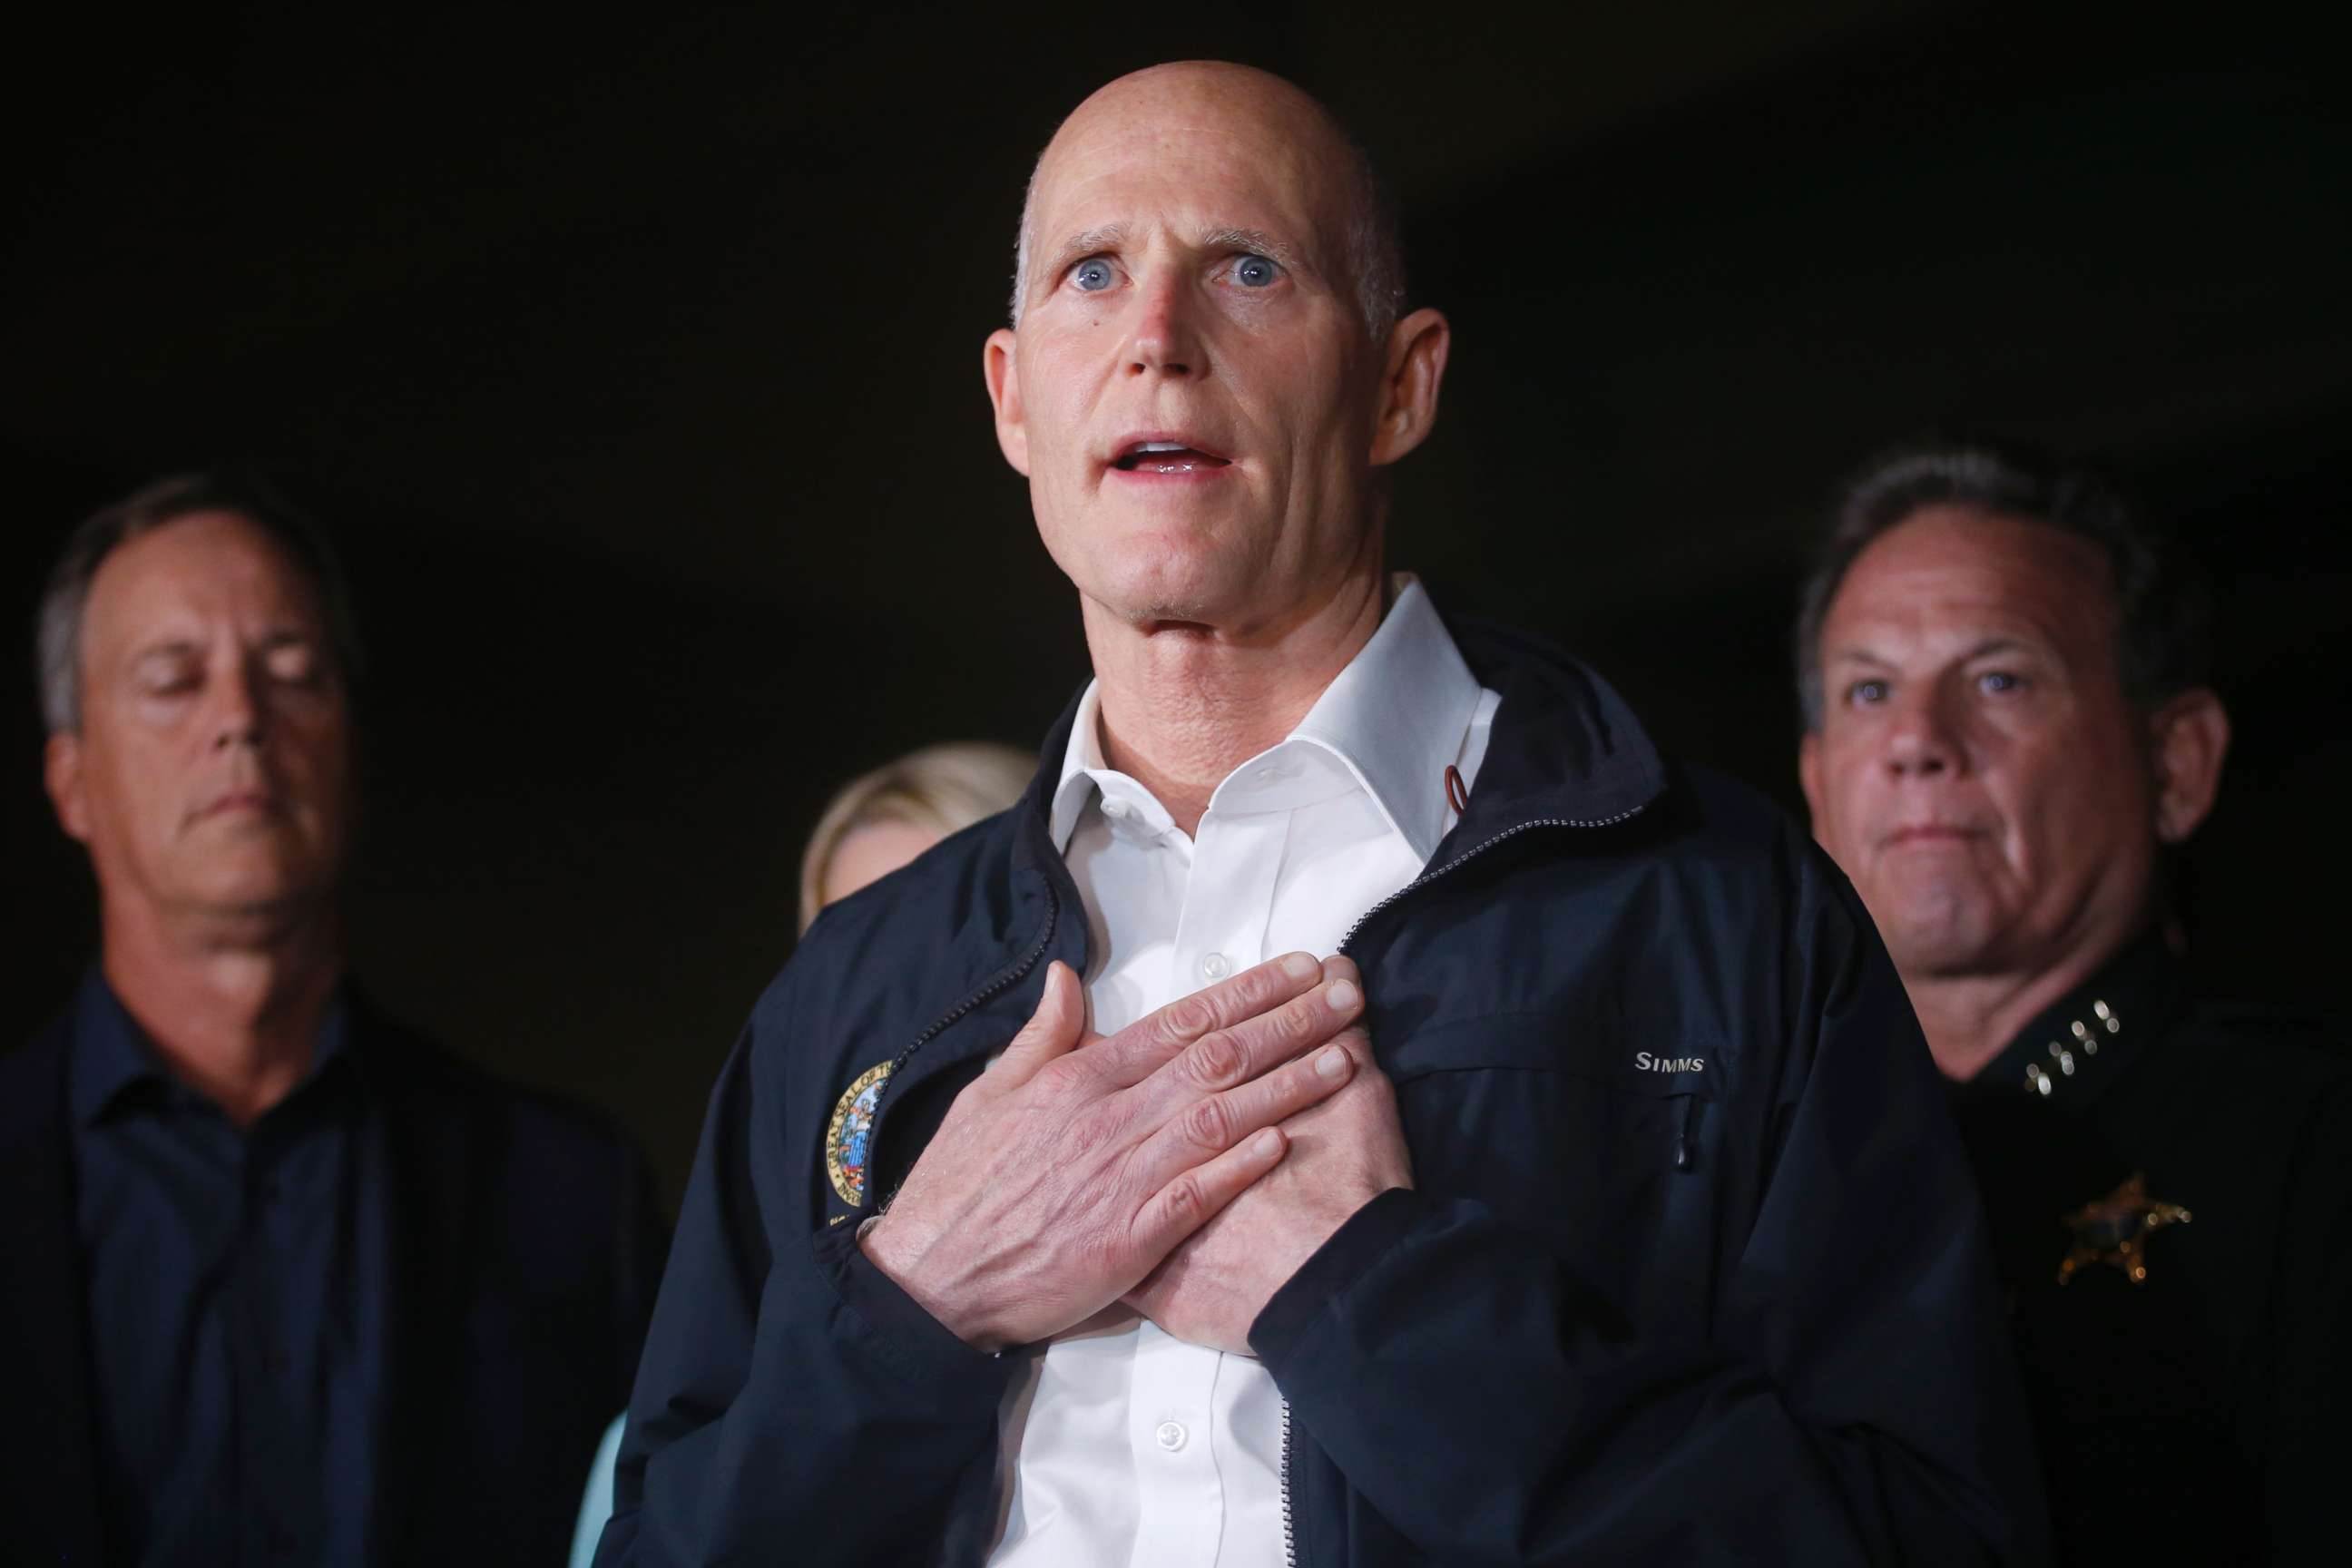 PHOTO: Florida Gov. Rick Scott gestures as he speaks during a news conference near Marjory Stoneman Douglas High School in Parkland, Fla., where a former student is killed at least 17 people on Feb. 14, 2018.